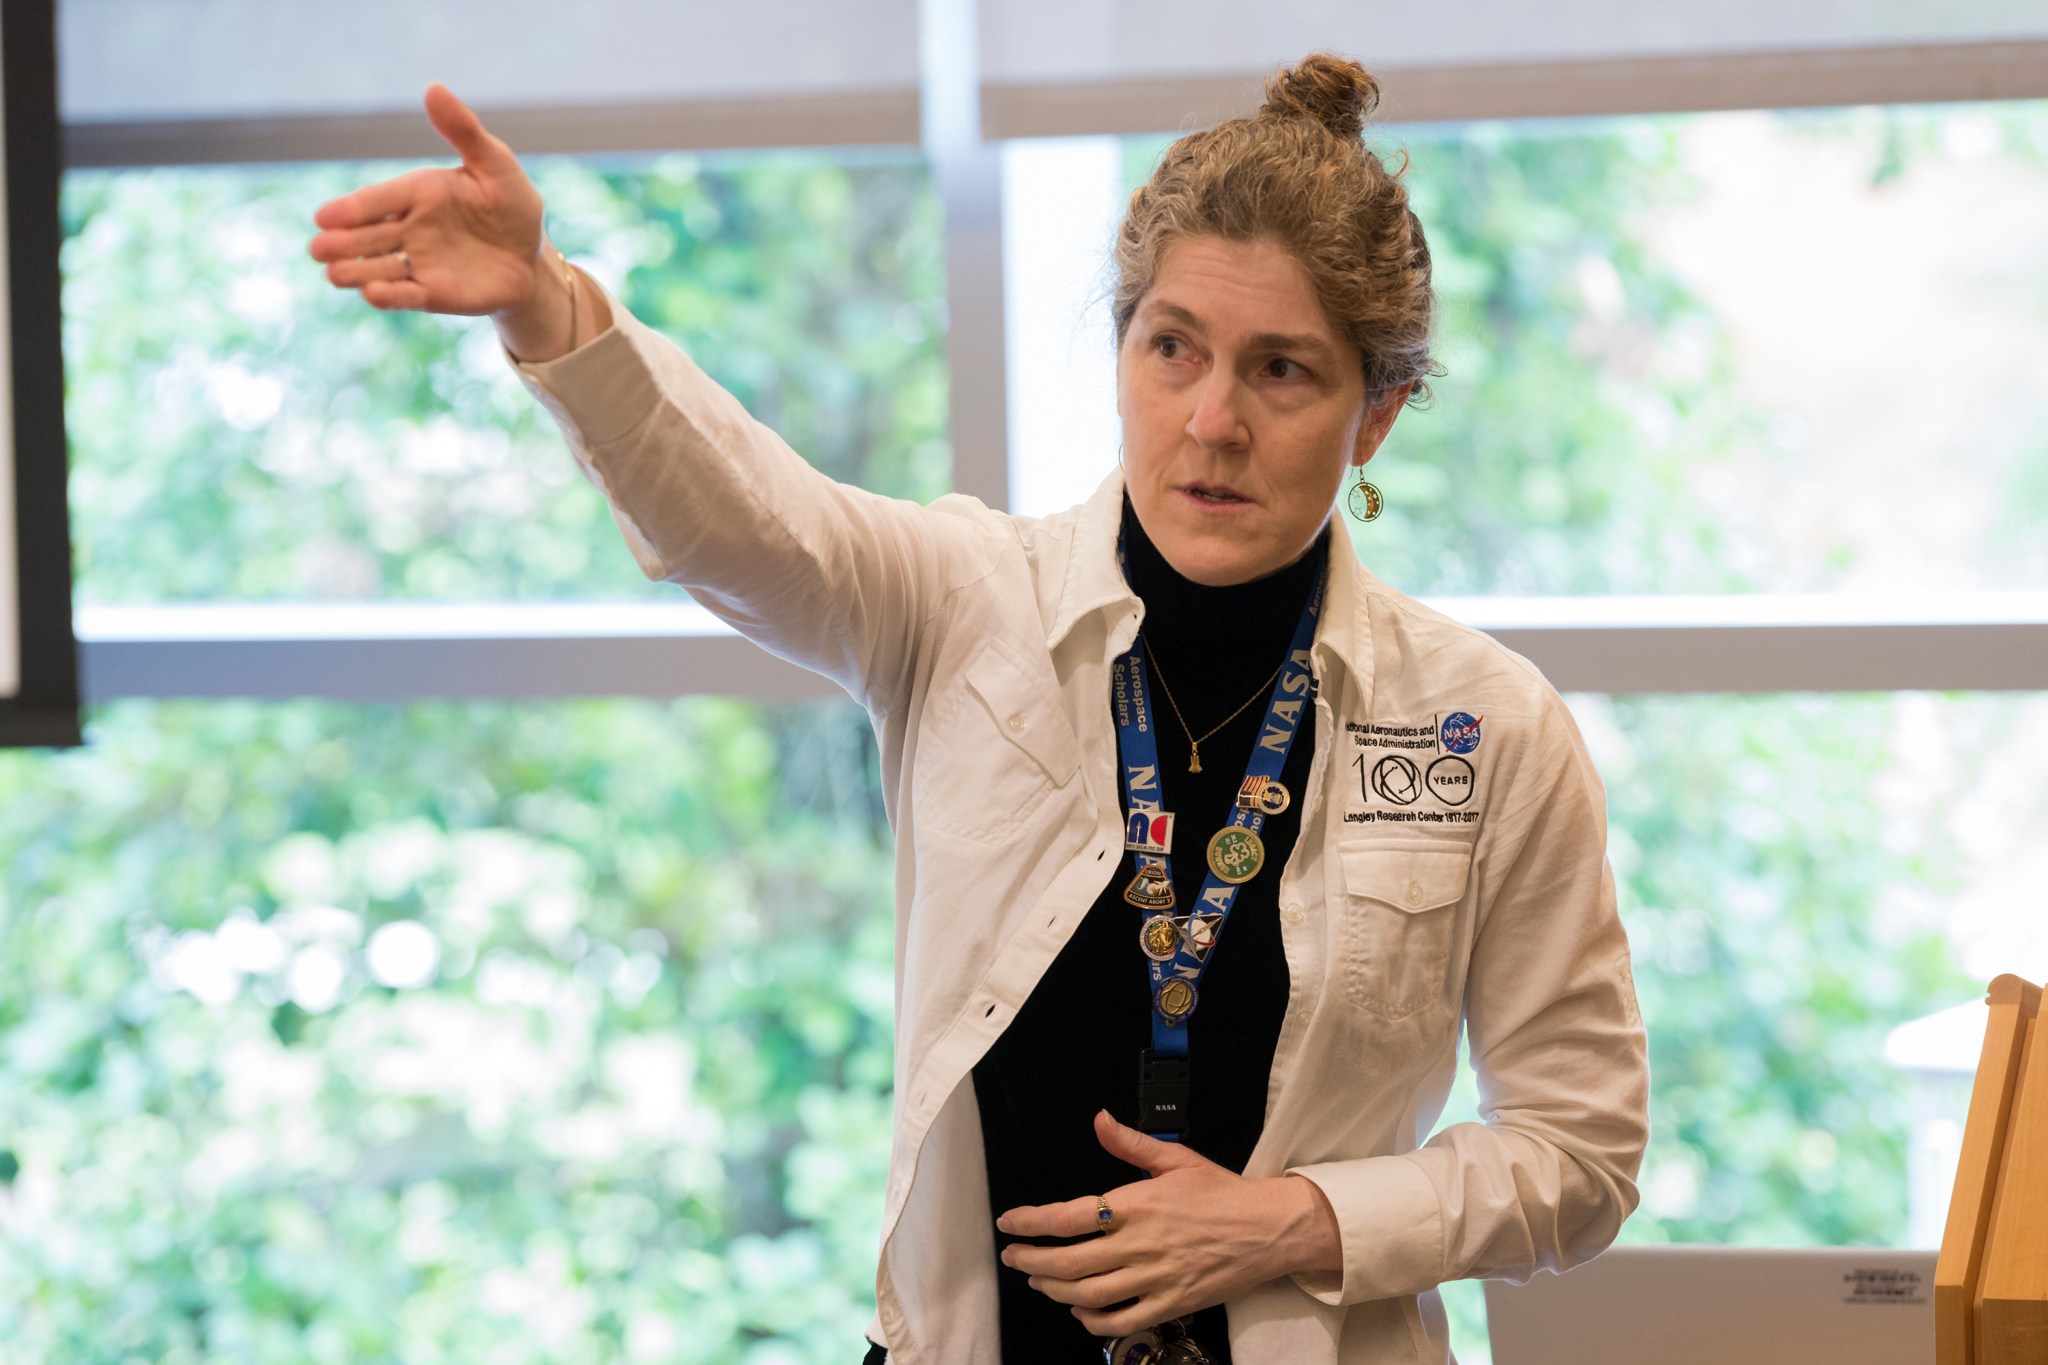 “We’re going to learn together, we’re going to laugh together, but we’re also going to grow together,” said Dr. Anne Weiss, Langley's MODSIM lead.